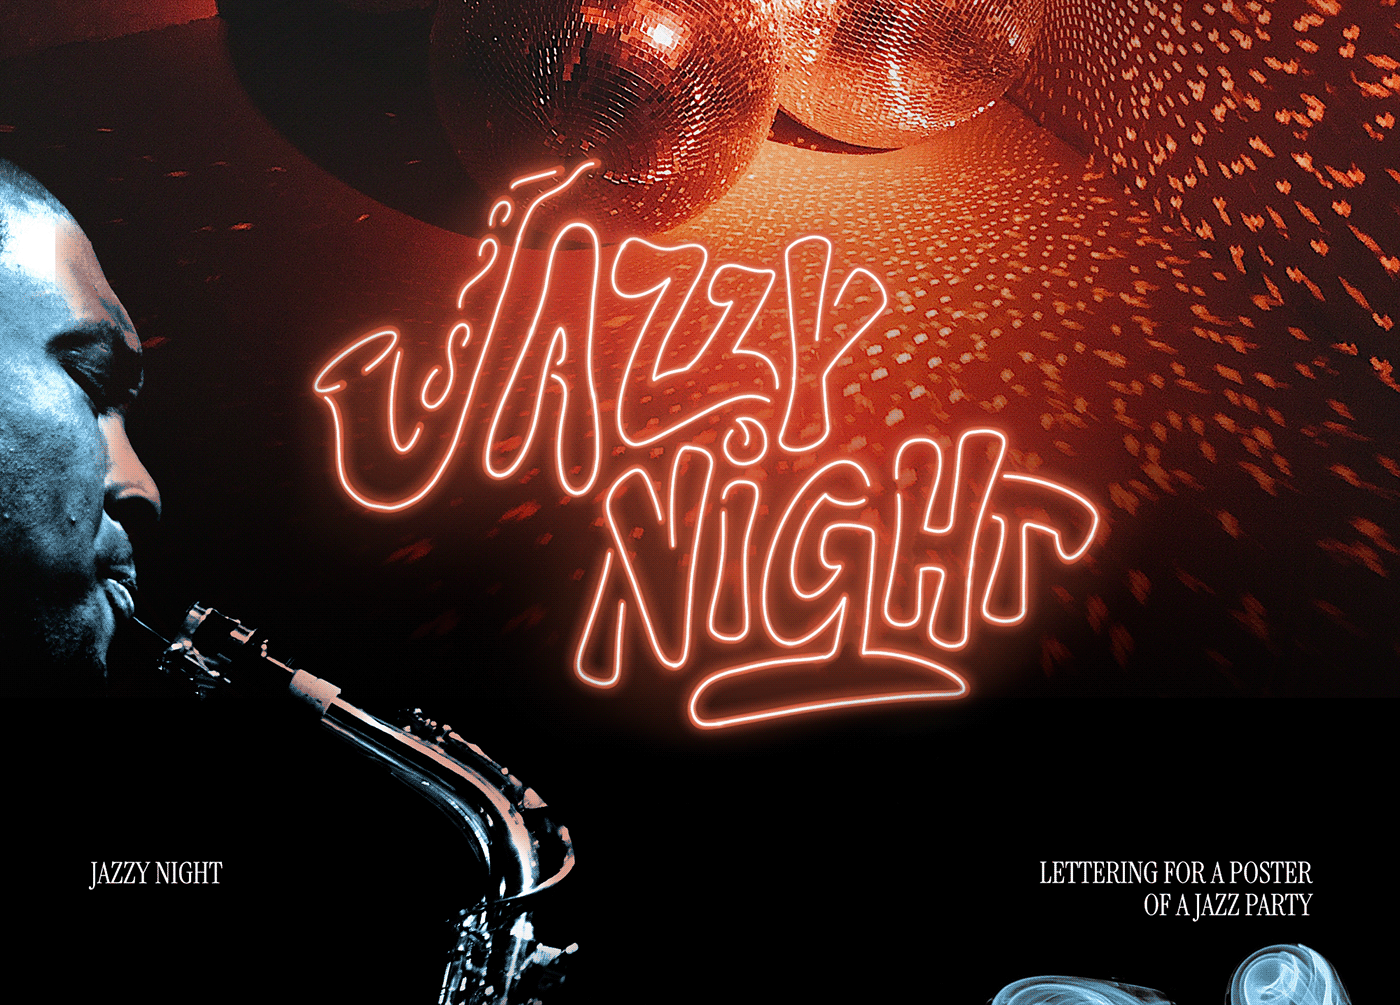 Lettering in neon style Jazzy Night for a poster of a Jazz Party